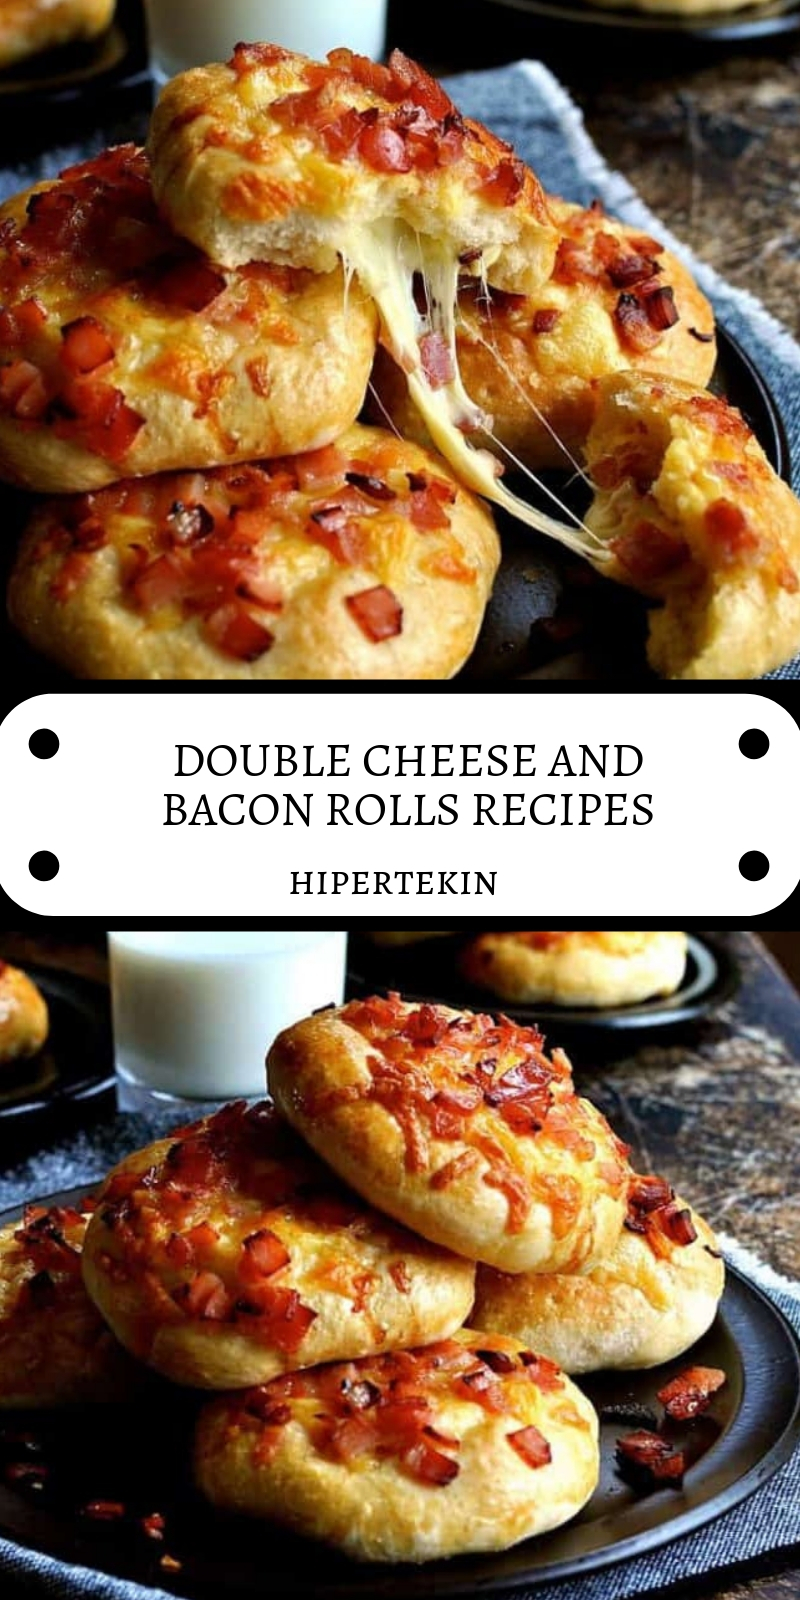 DOUBLE CHEESE AND BACON ROLLS RECIPES